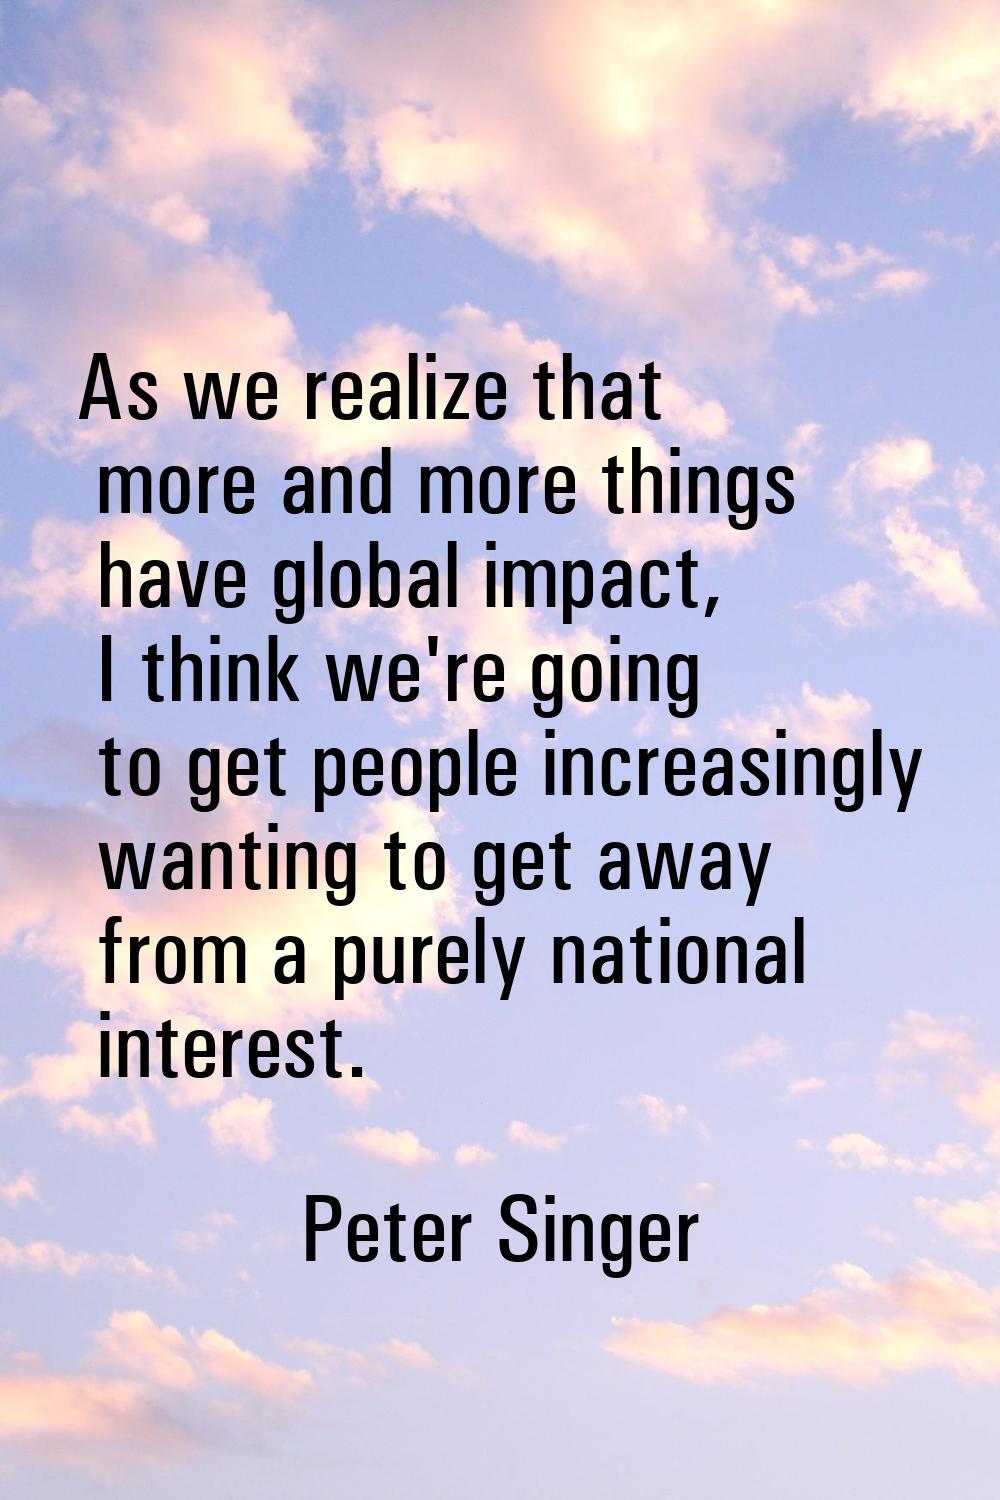 As we realize that more and more things have global impact, I think we're going to get people incre